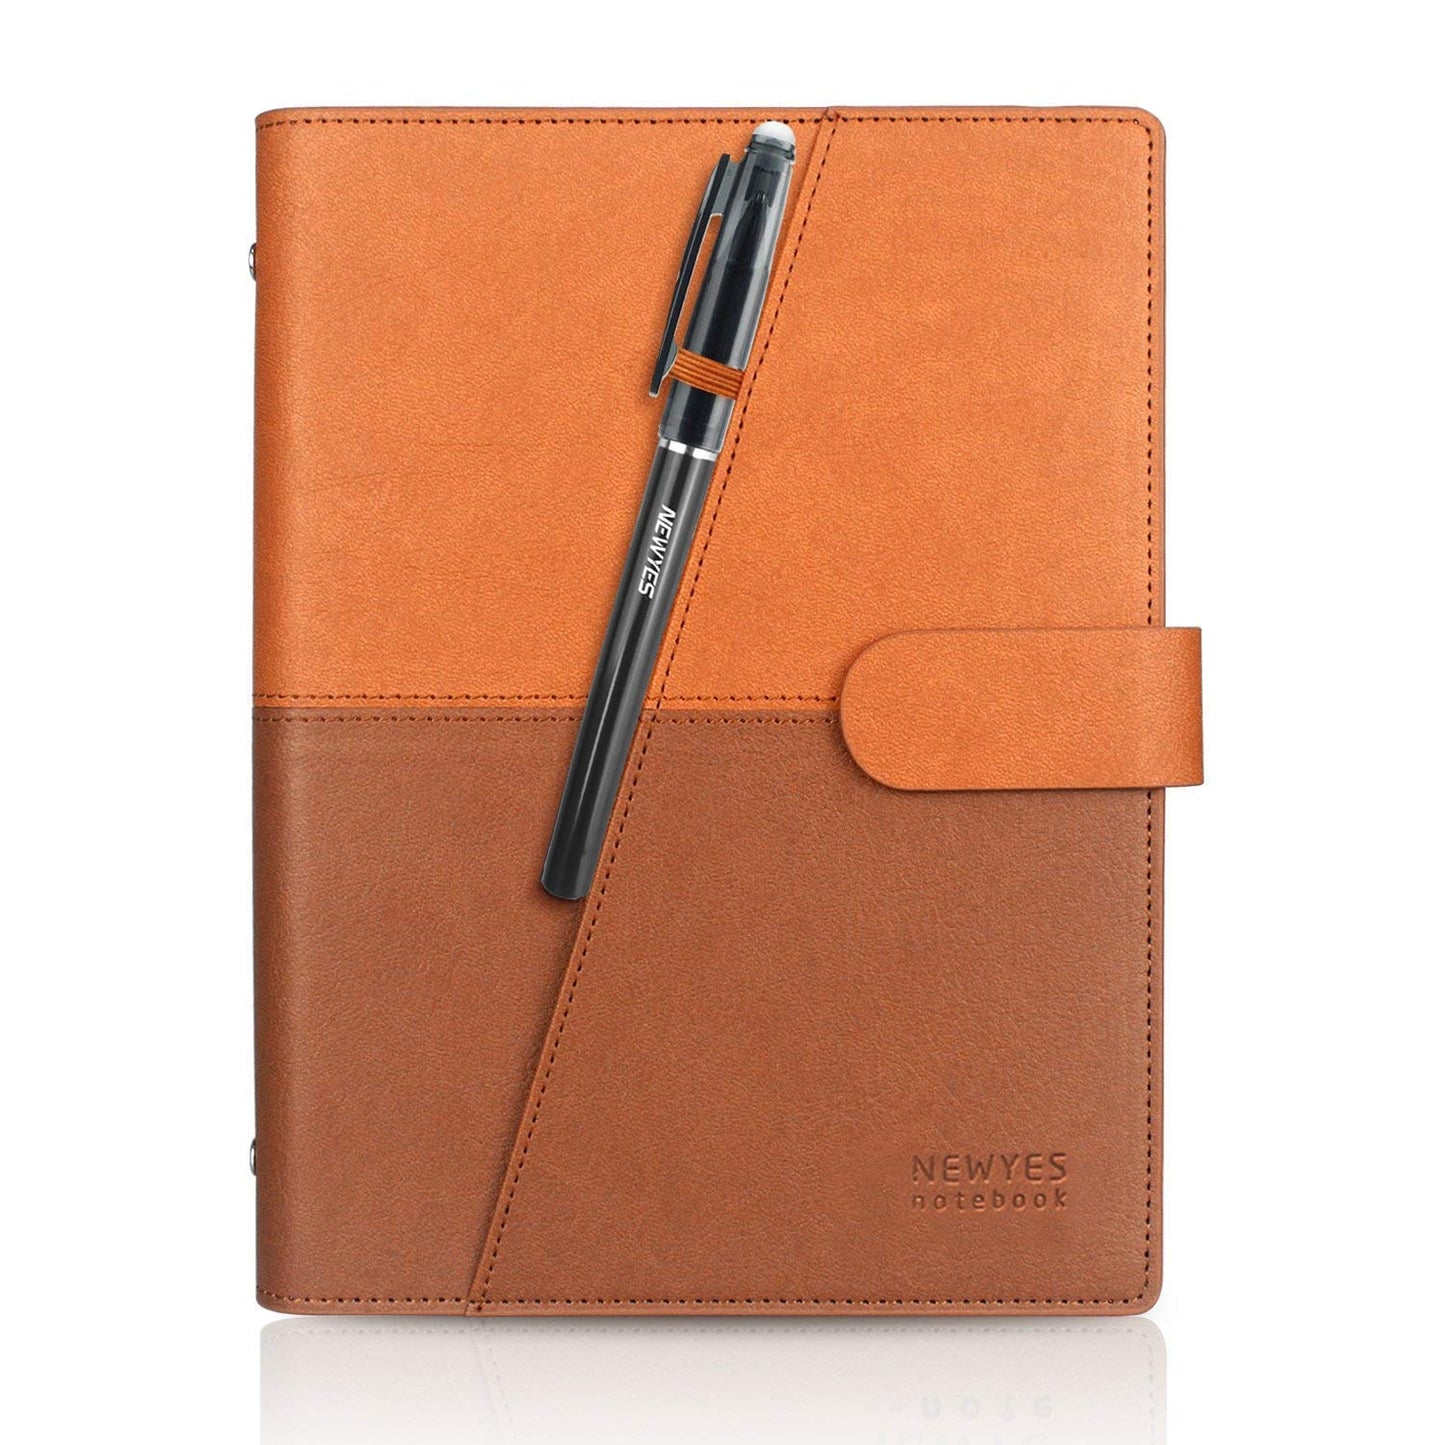 Notebook NEWYES NA4AP1-BL1 CUADERNO REUTILIZABLE SMART NOTEBOOK